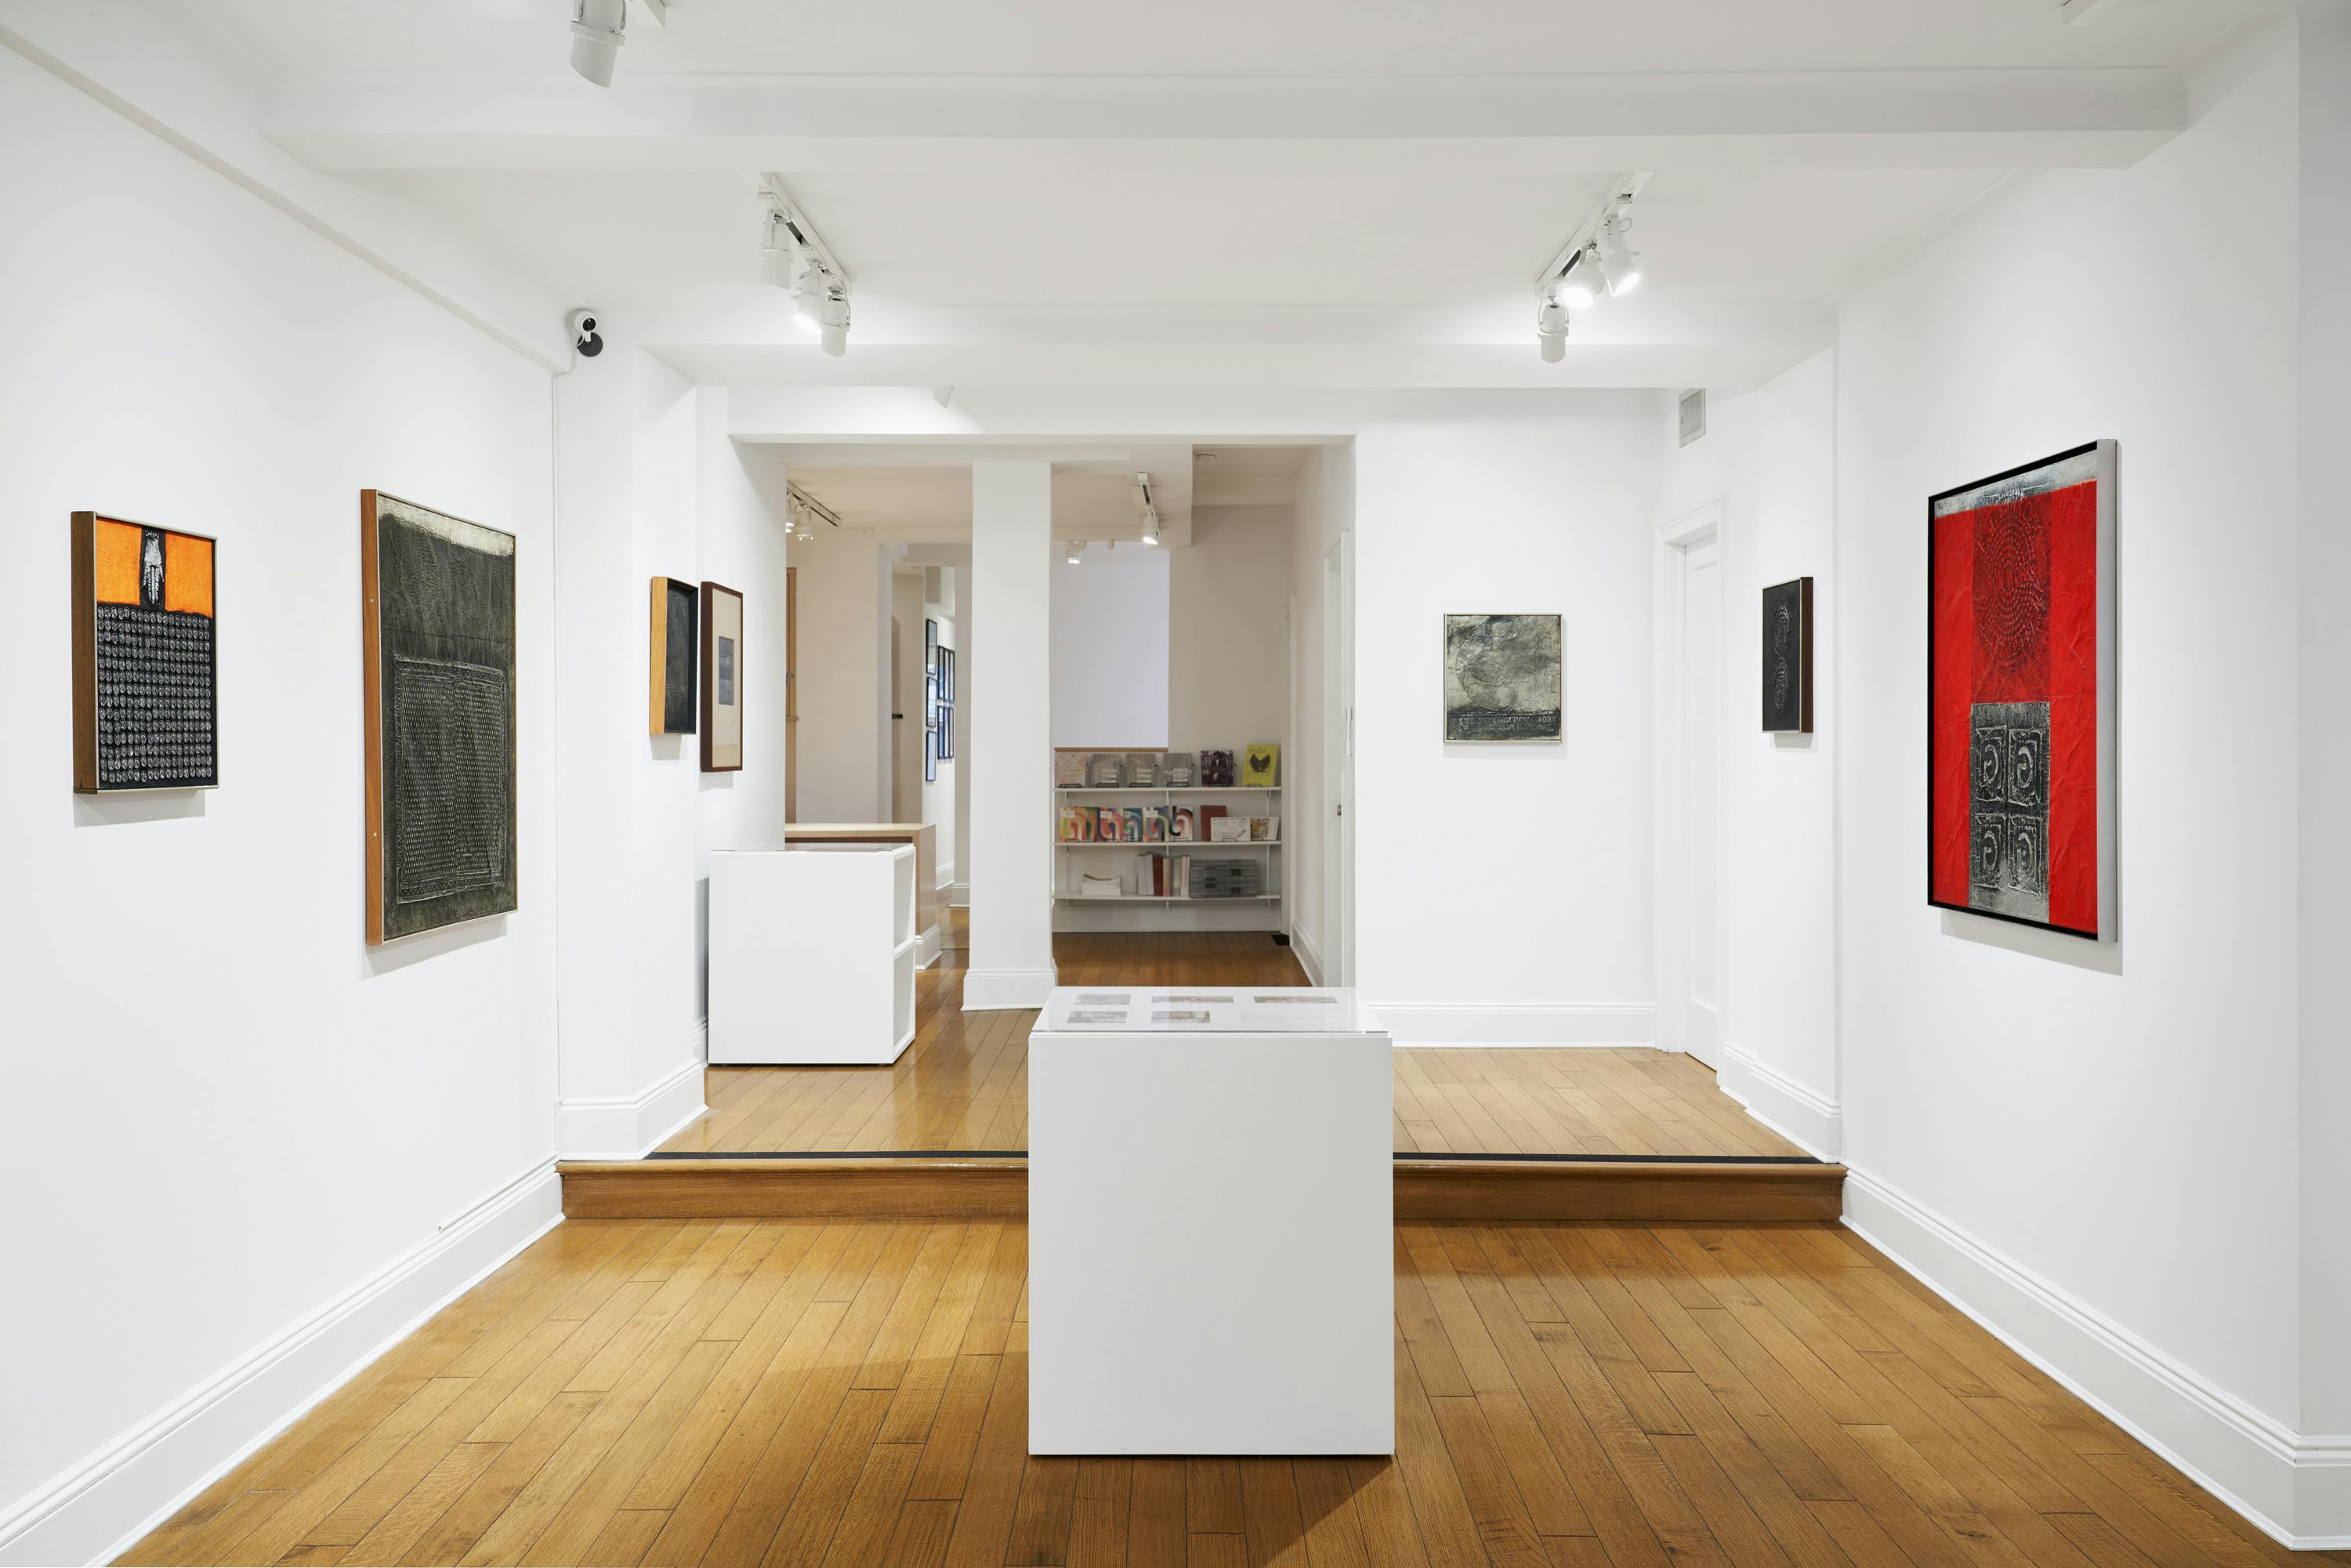 Installation view of José Antonio Fernández-Muro: Geometry in Transfer exhibition showing seven paintings and two vitrines.